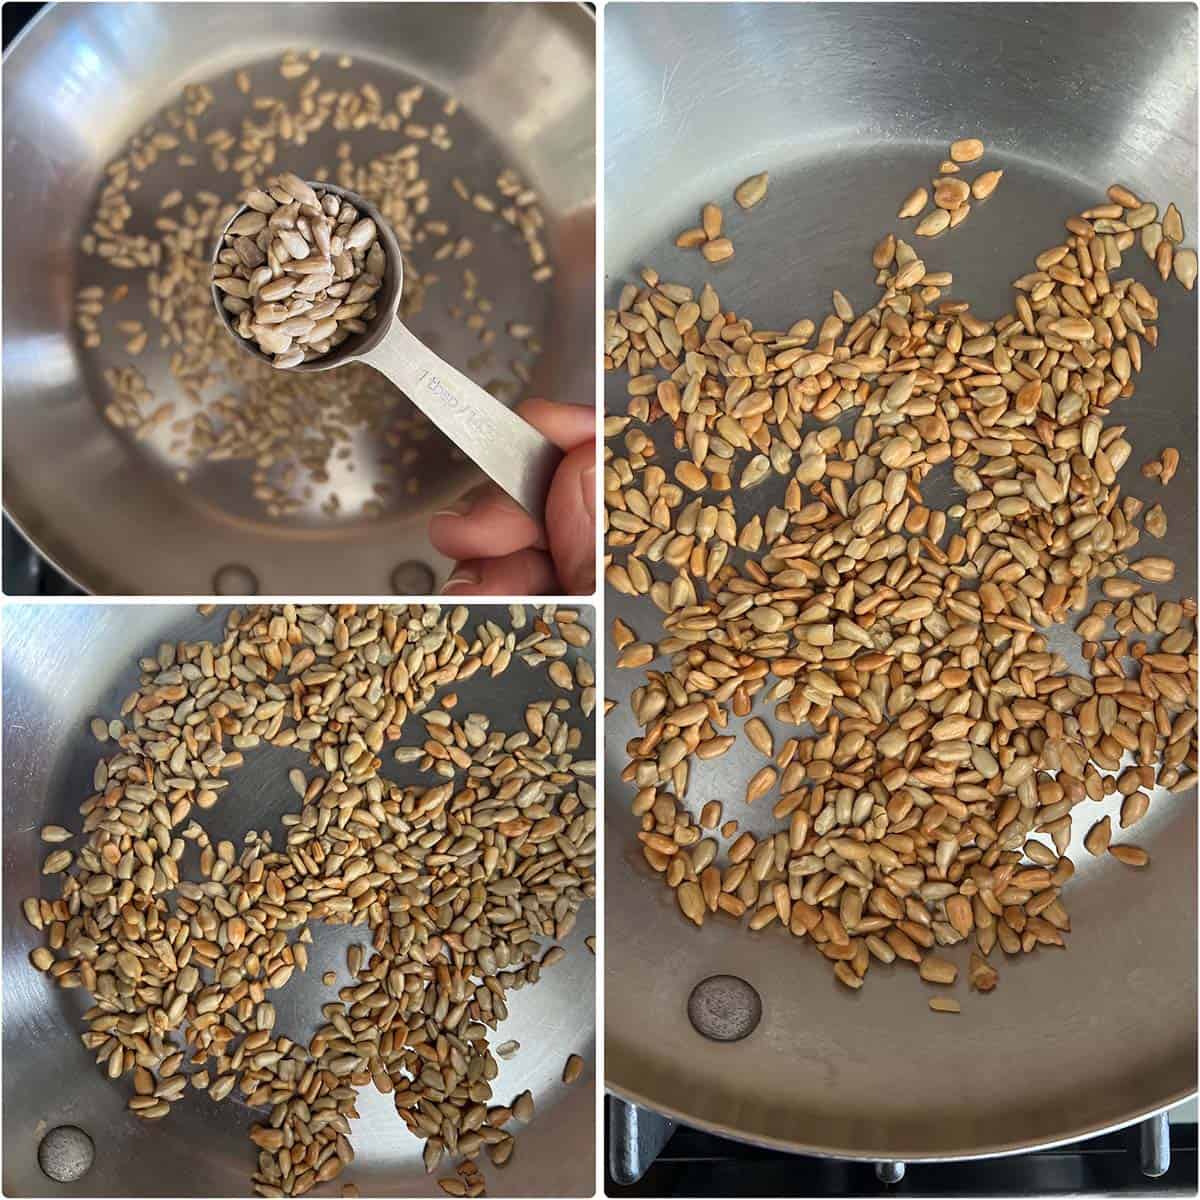 3 panel photo showing the toasting of sunflower seeds.